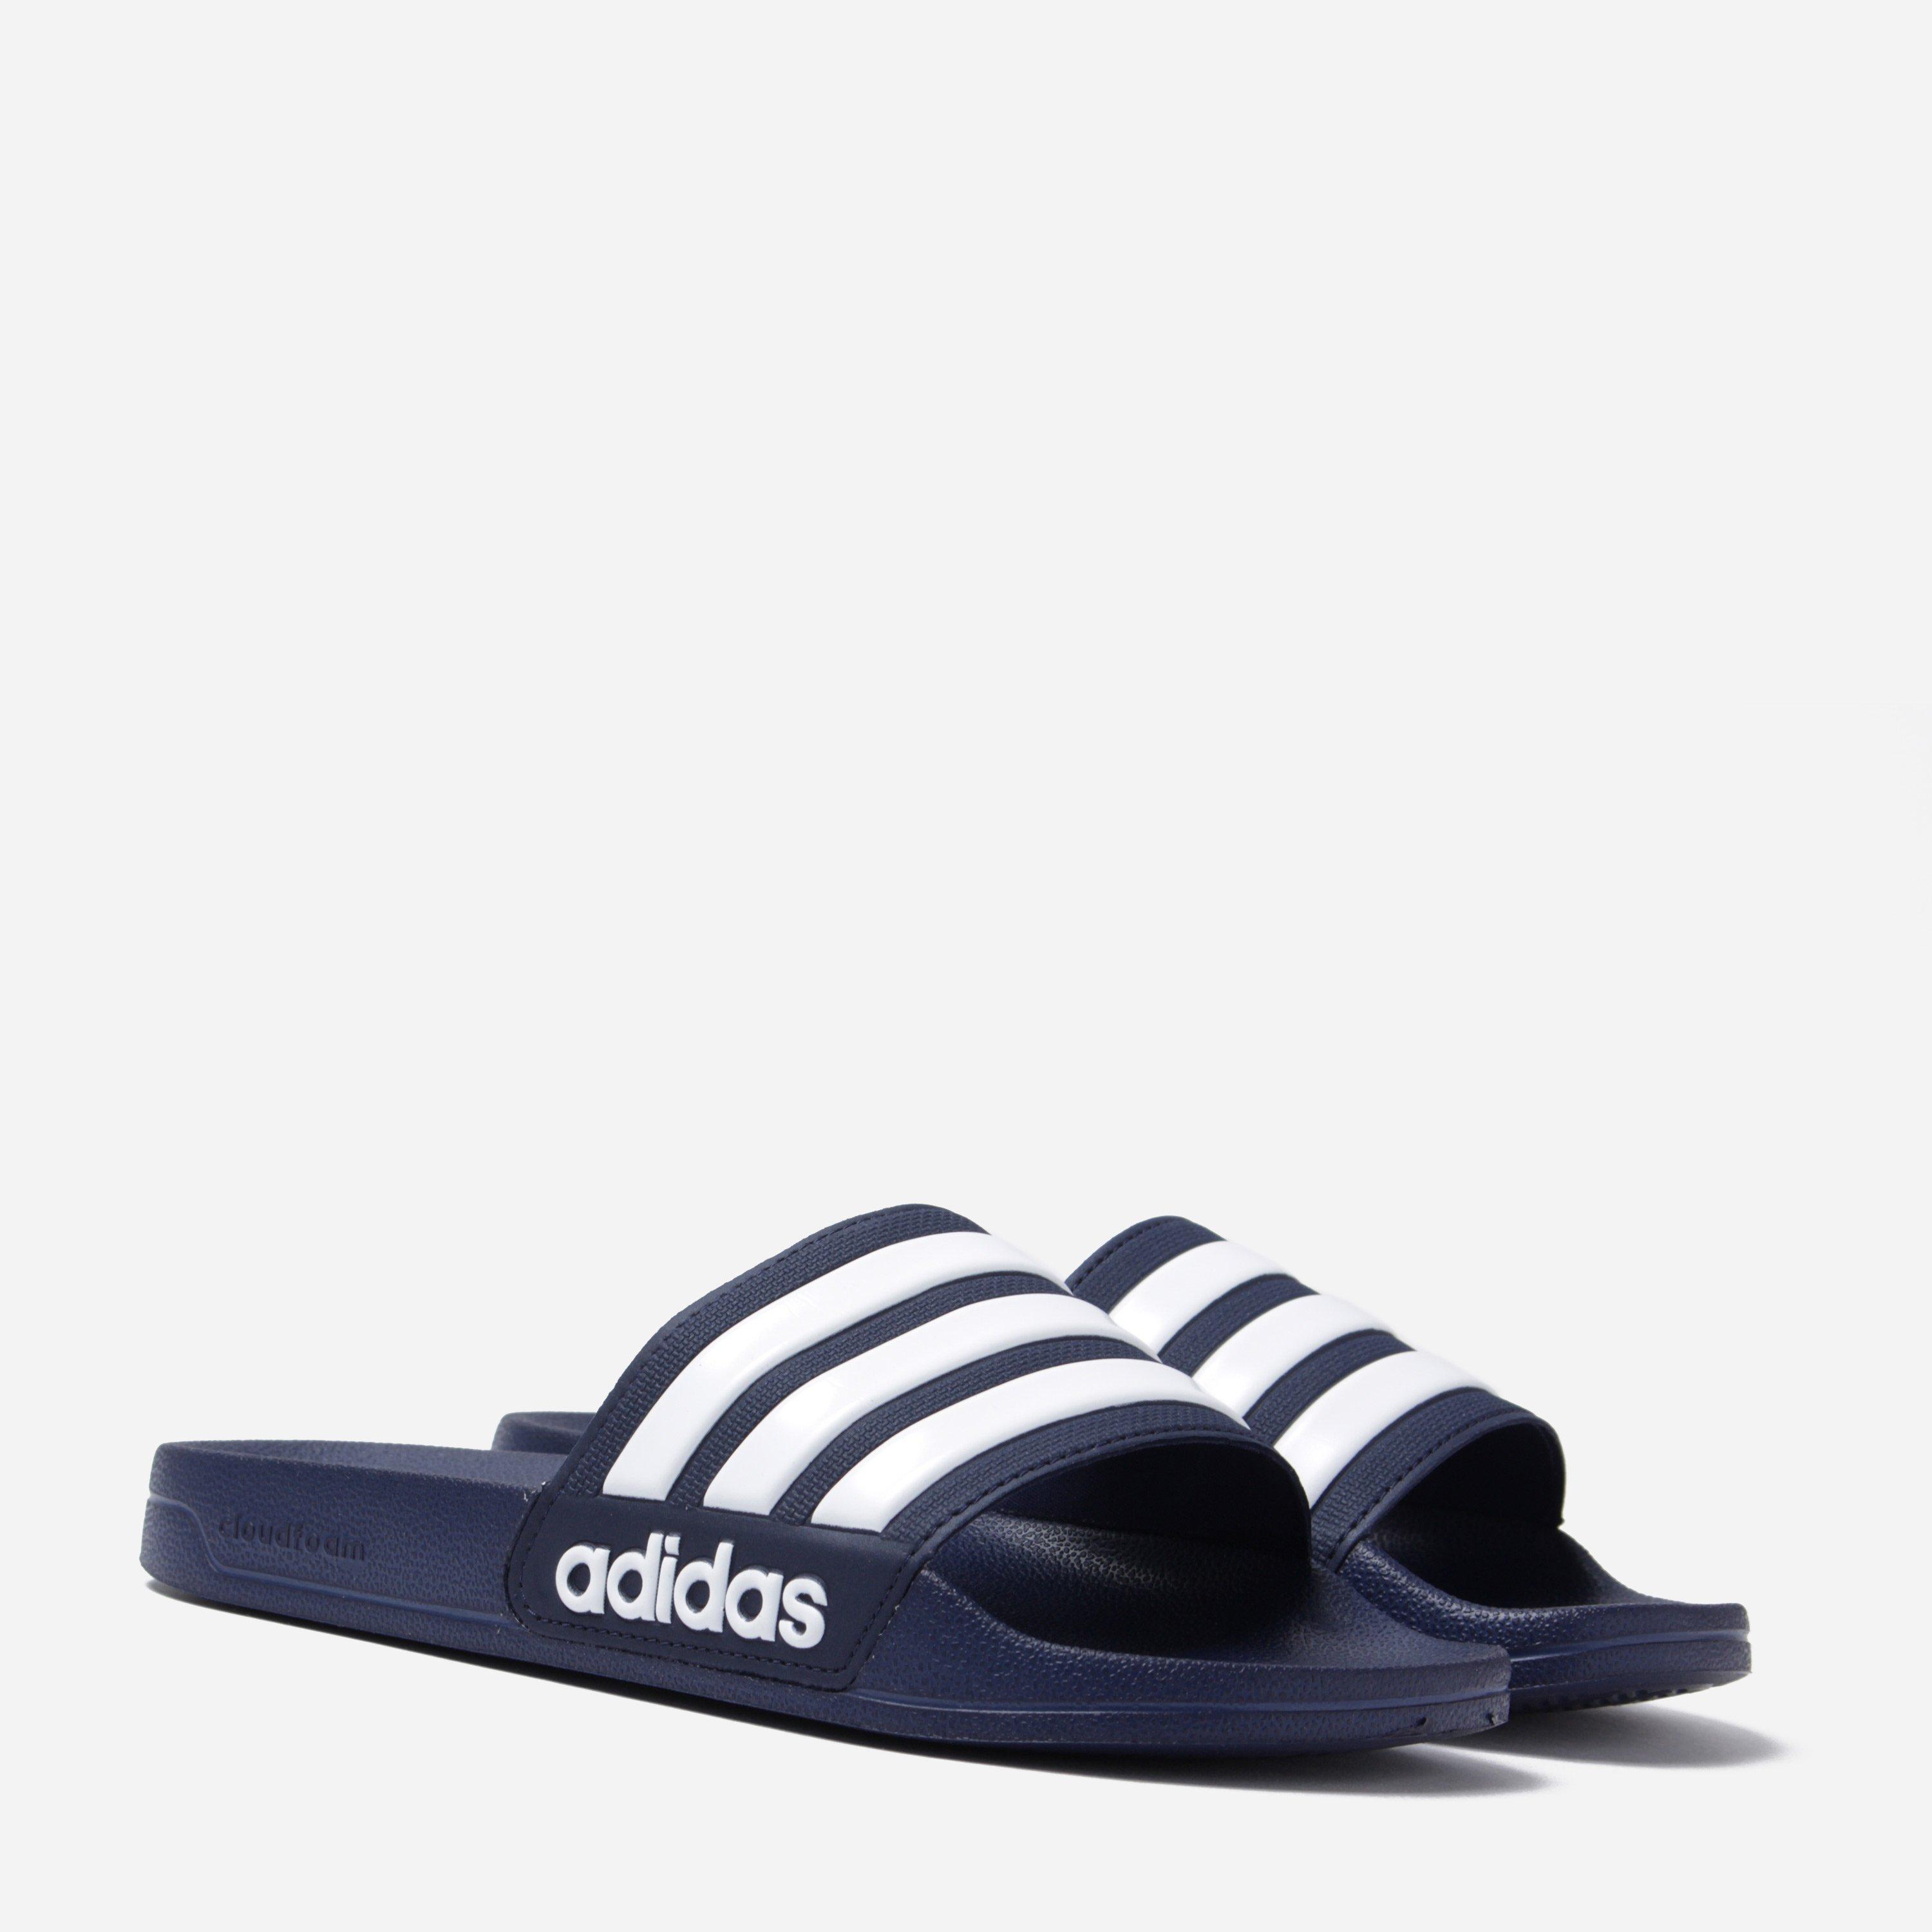 adidas Synthetic Cloudfoam Adilette Slides in Navy (Blue) for Men - Lyst